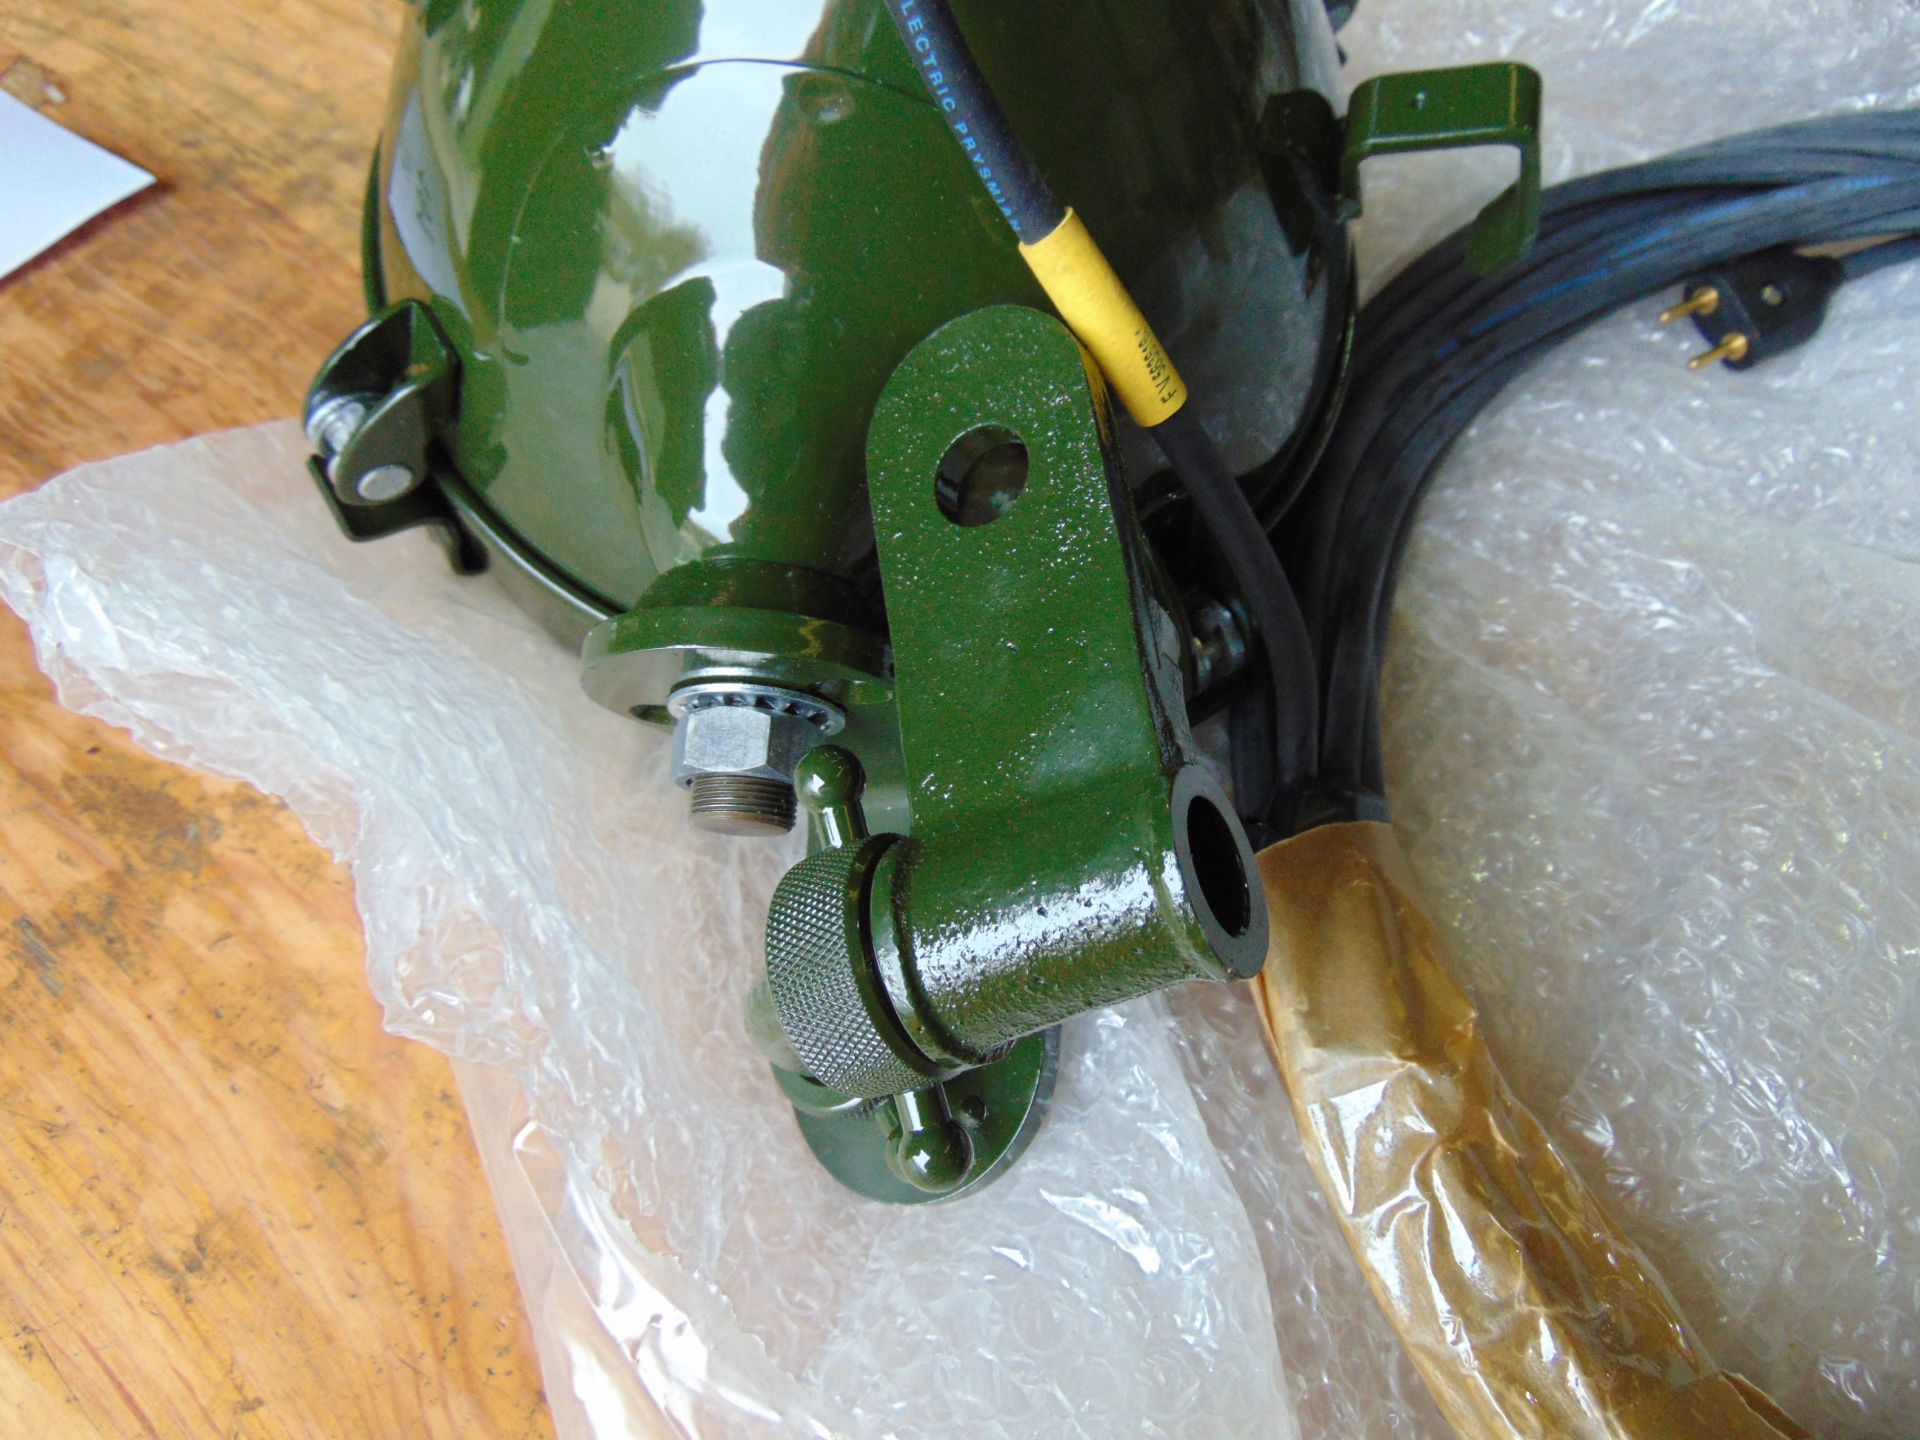 New Unissued FV159907 Vehicle Search Light c/w Plug and Mounting Brackets in Original Packing - Image 4 of 8